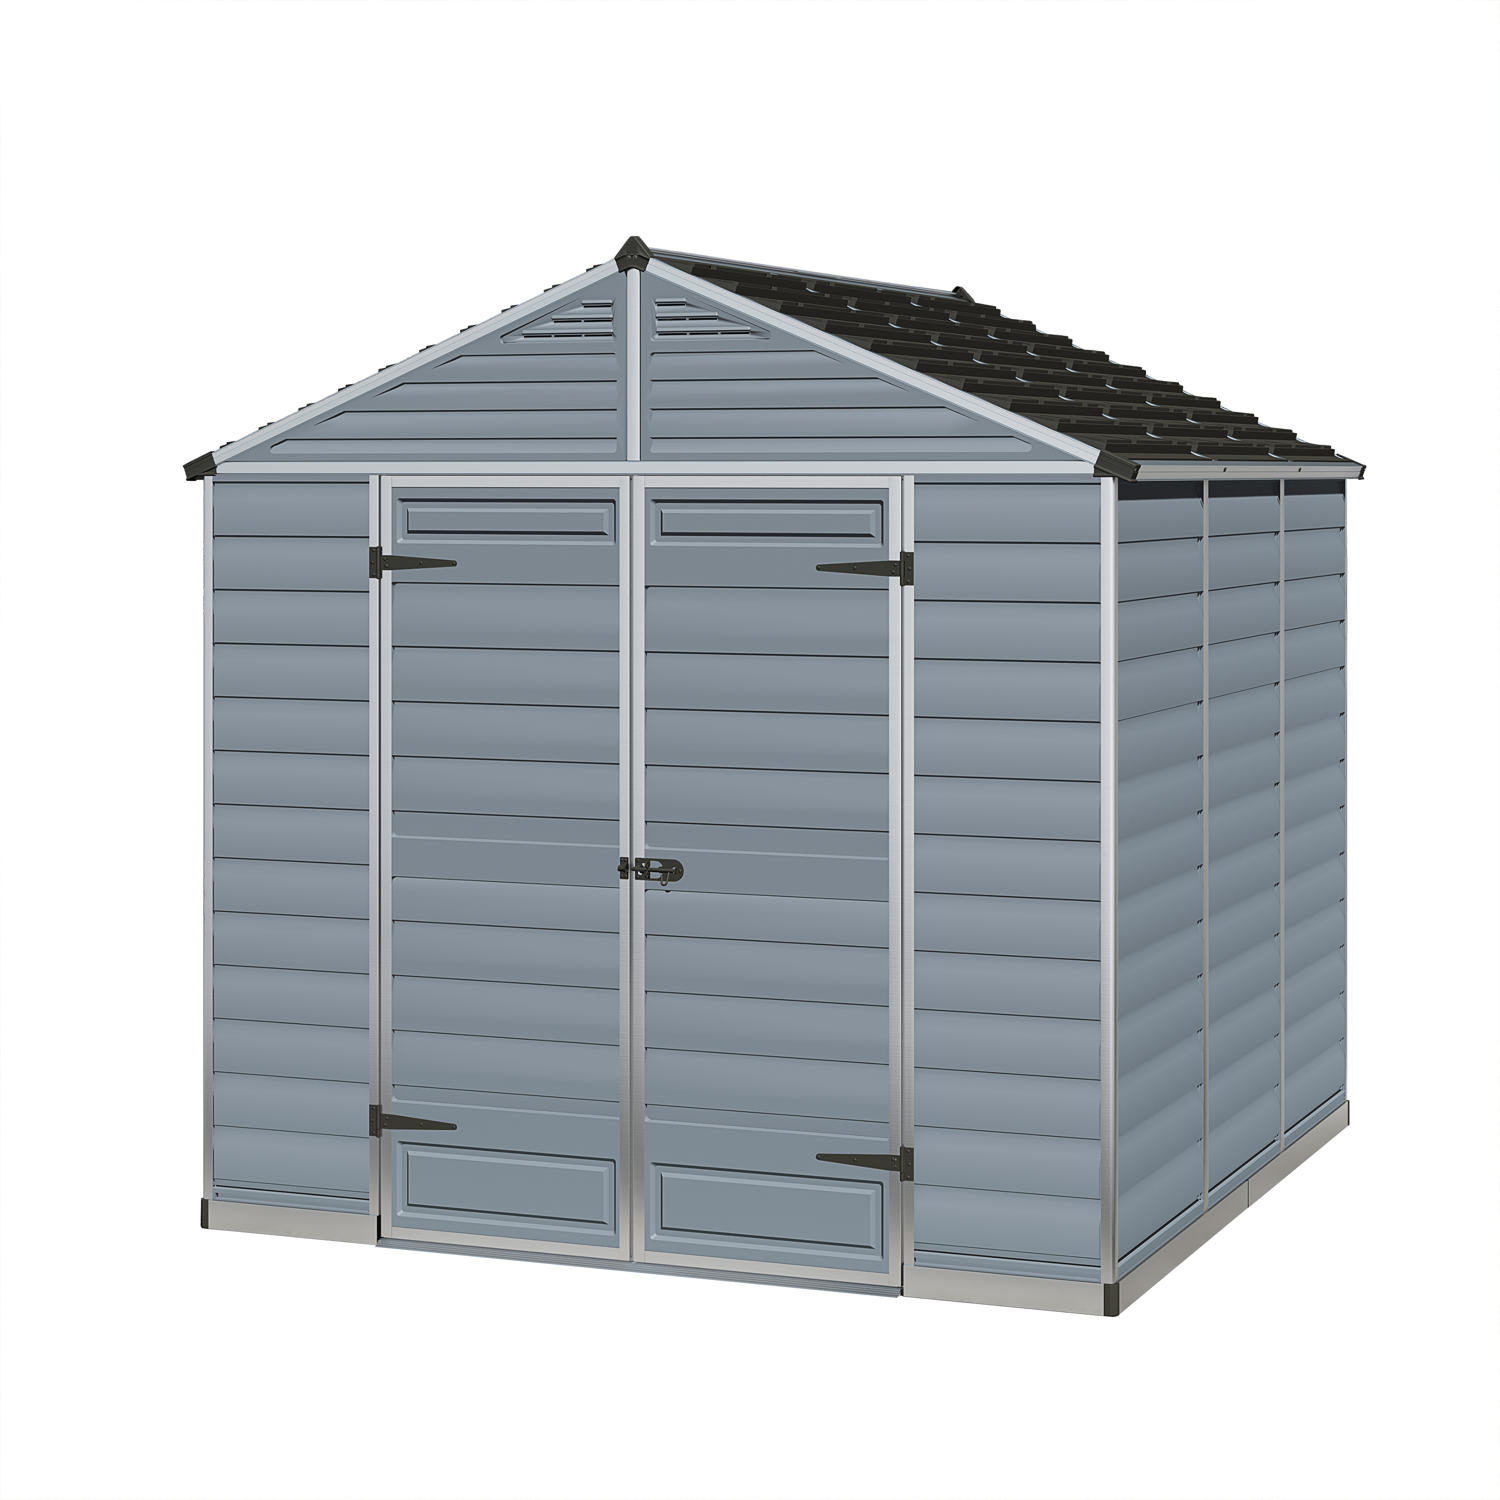 Palram 8x8 Plastic Skylight Grey Shed Greenhouse Stores intended for proportions 1500 X 1500